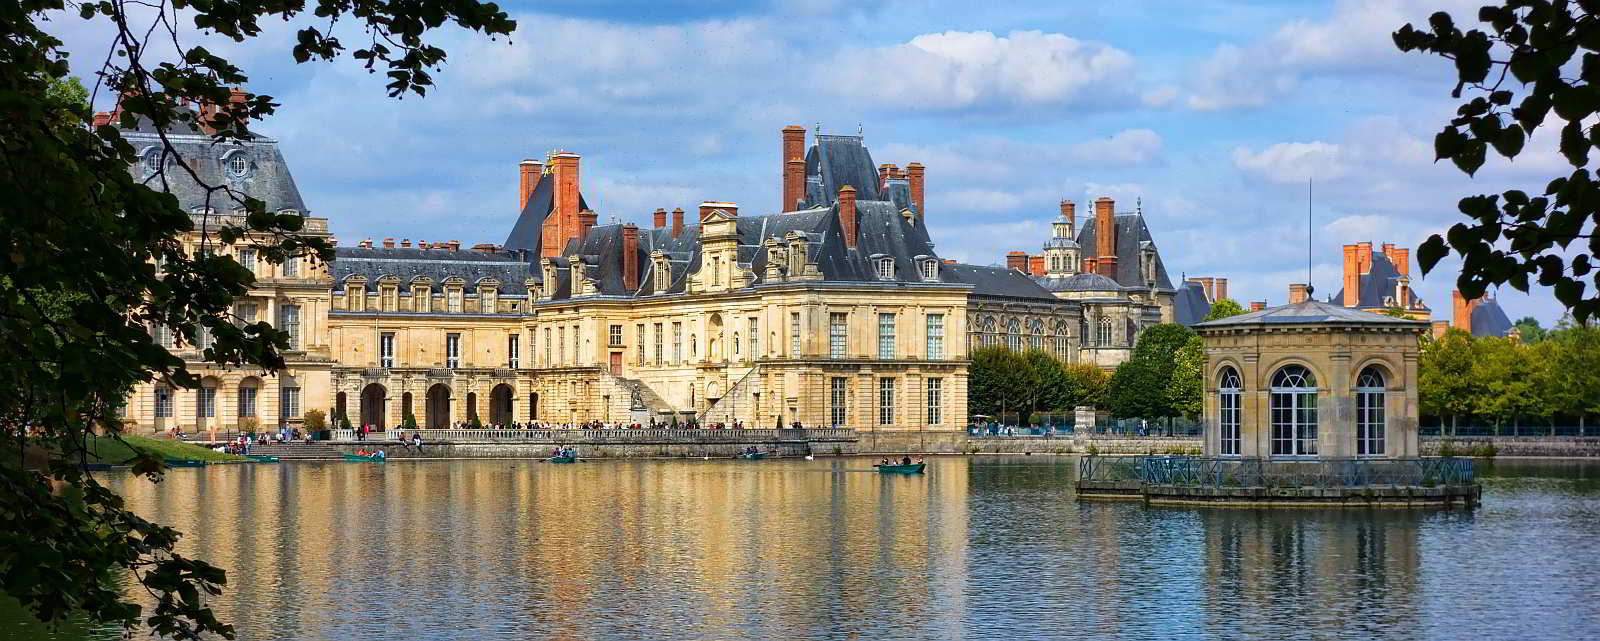 Paris Ile-de-France Fontainebleau Castle Private Guided Tour. Paris Luxury Holidays with In-Luxe Travel France, The specialist of luxury bespoke holidays in France since 2007